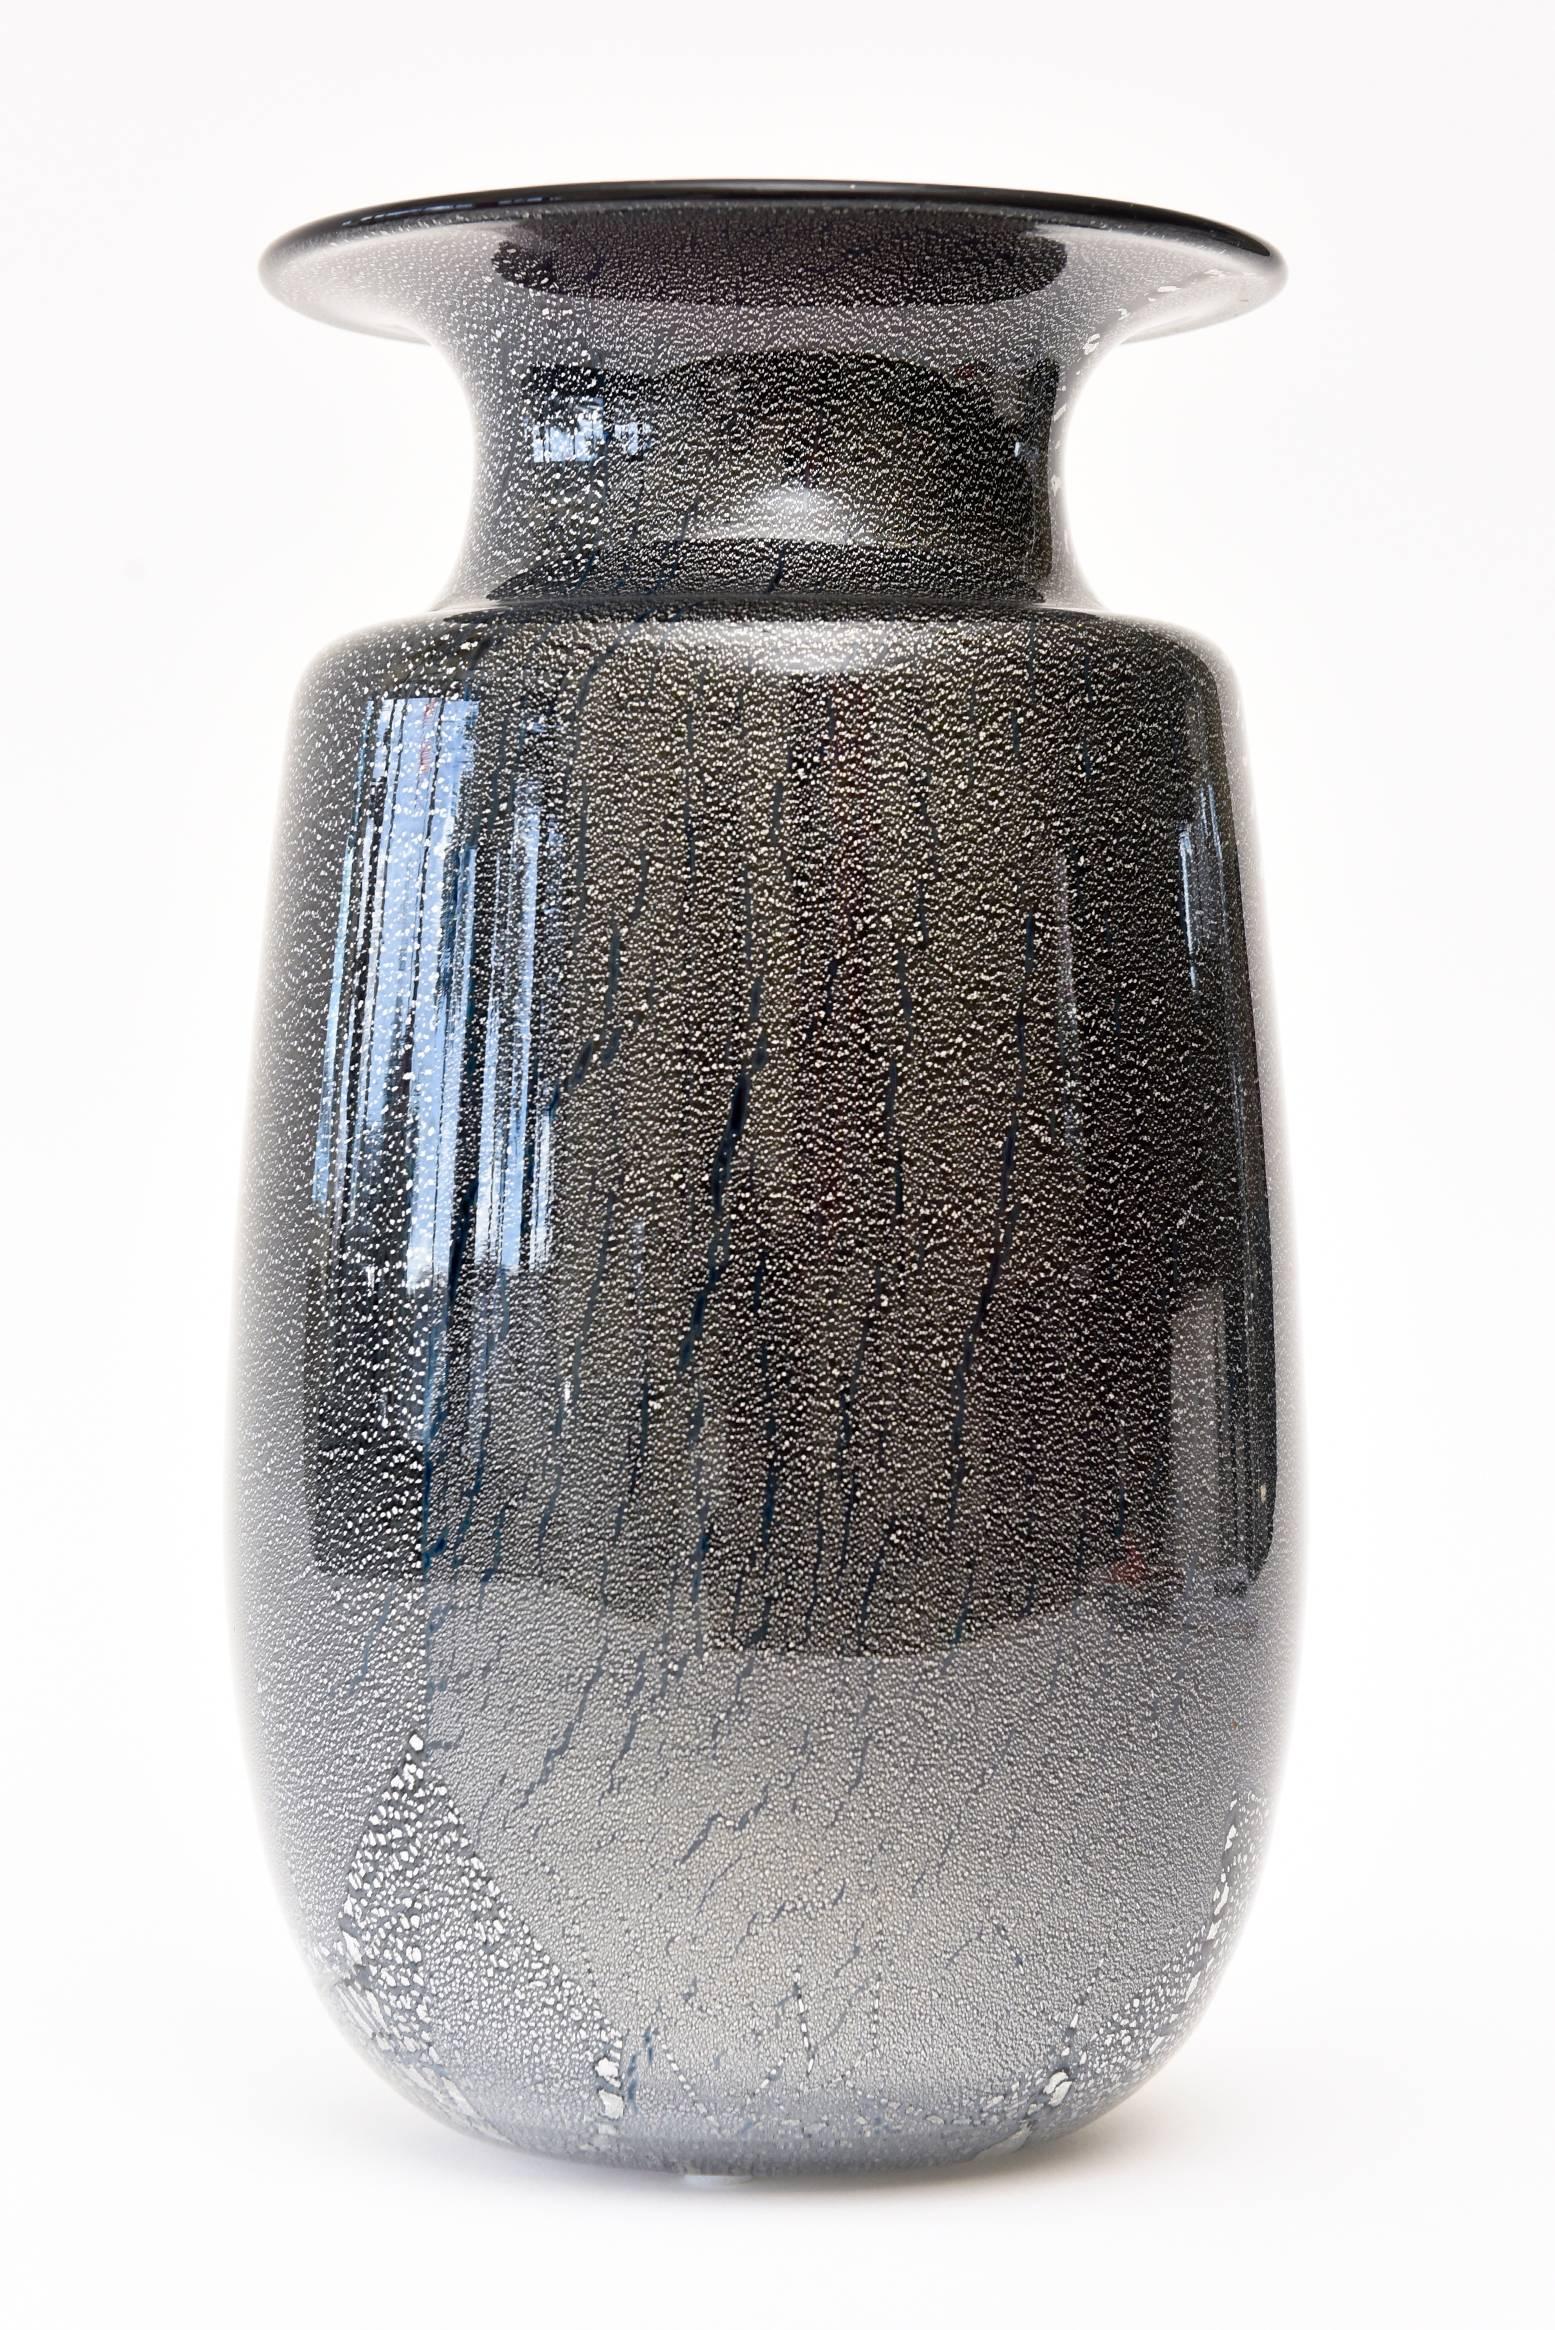 This stunning Italian Murano Seguso vase or vessel is black amethyst glass infused with an abstract and random design of silver foil infusions and droplets.
It has a very Japanese type landscape abstraction to the layered cased glass. It is infused